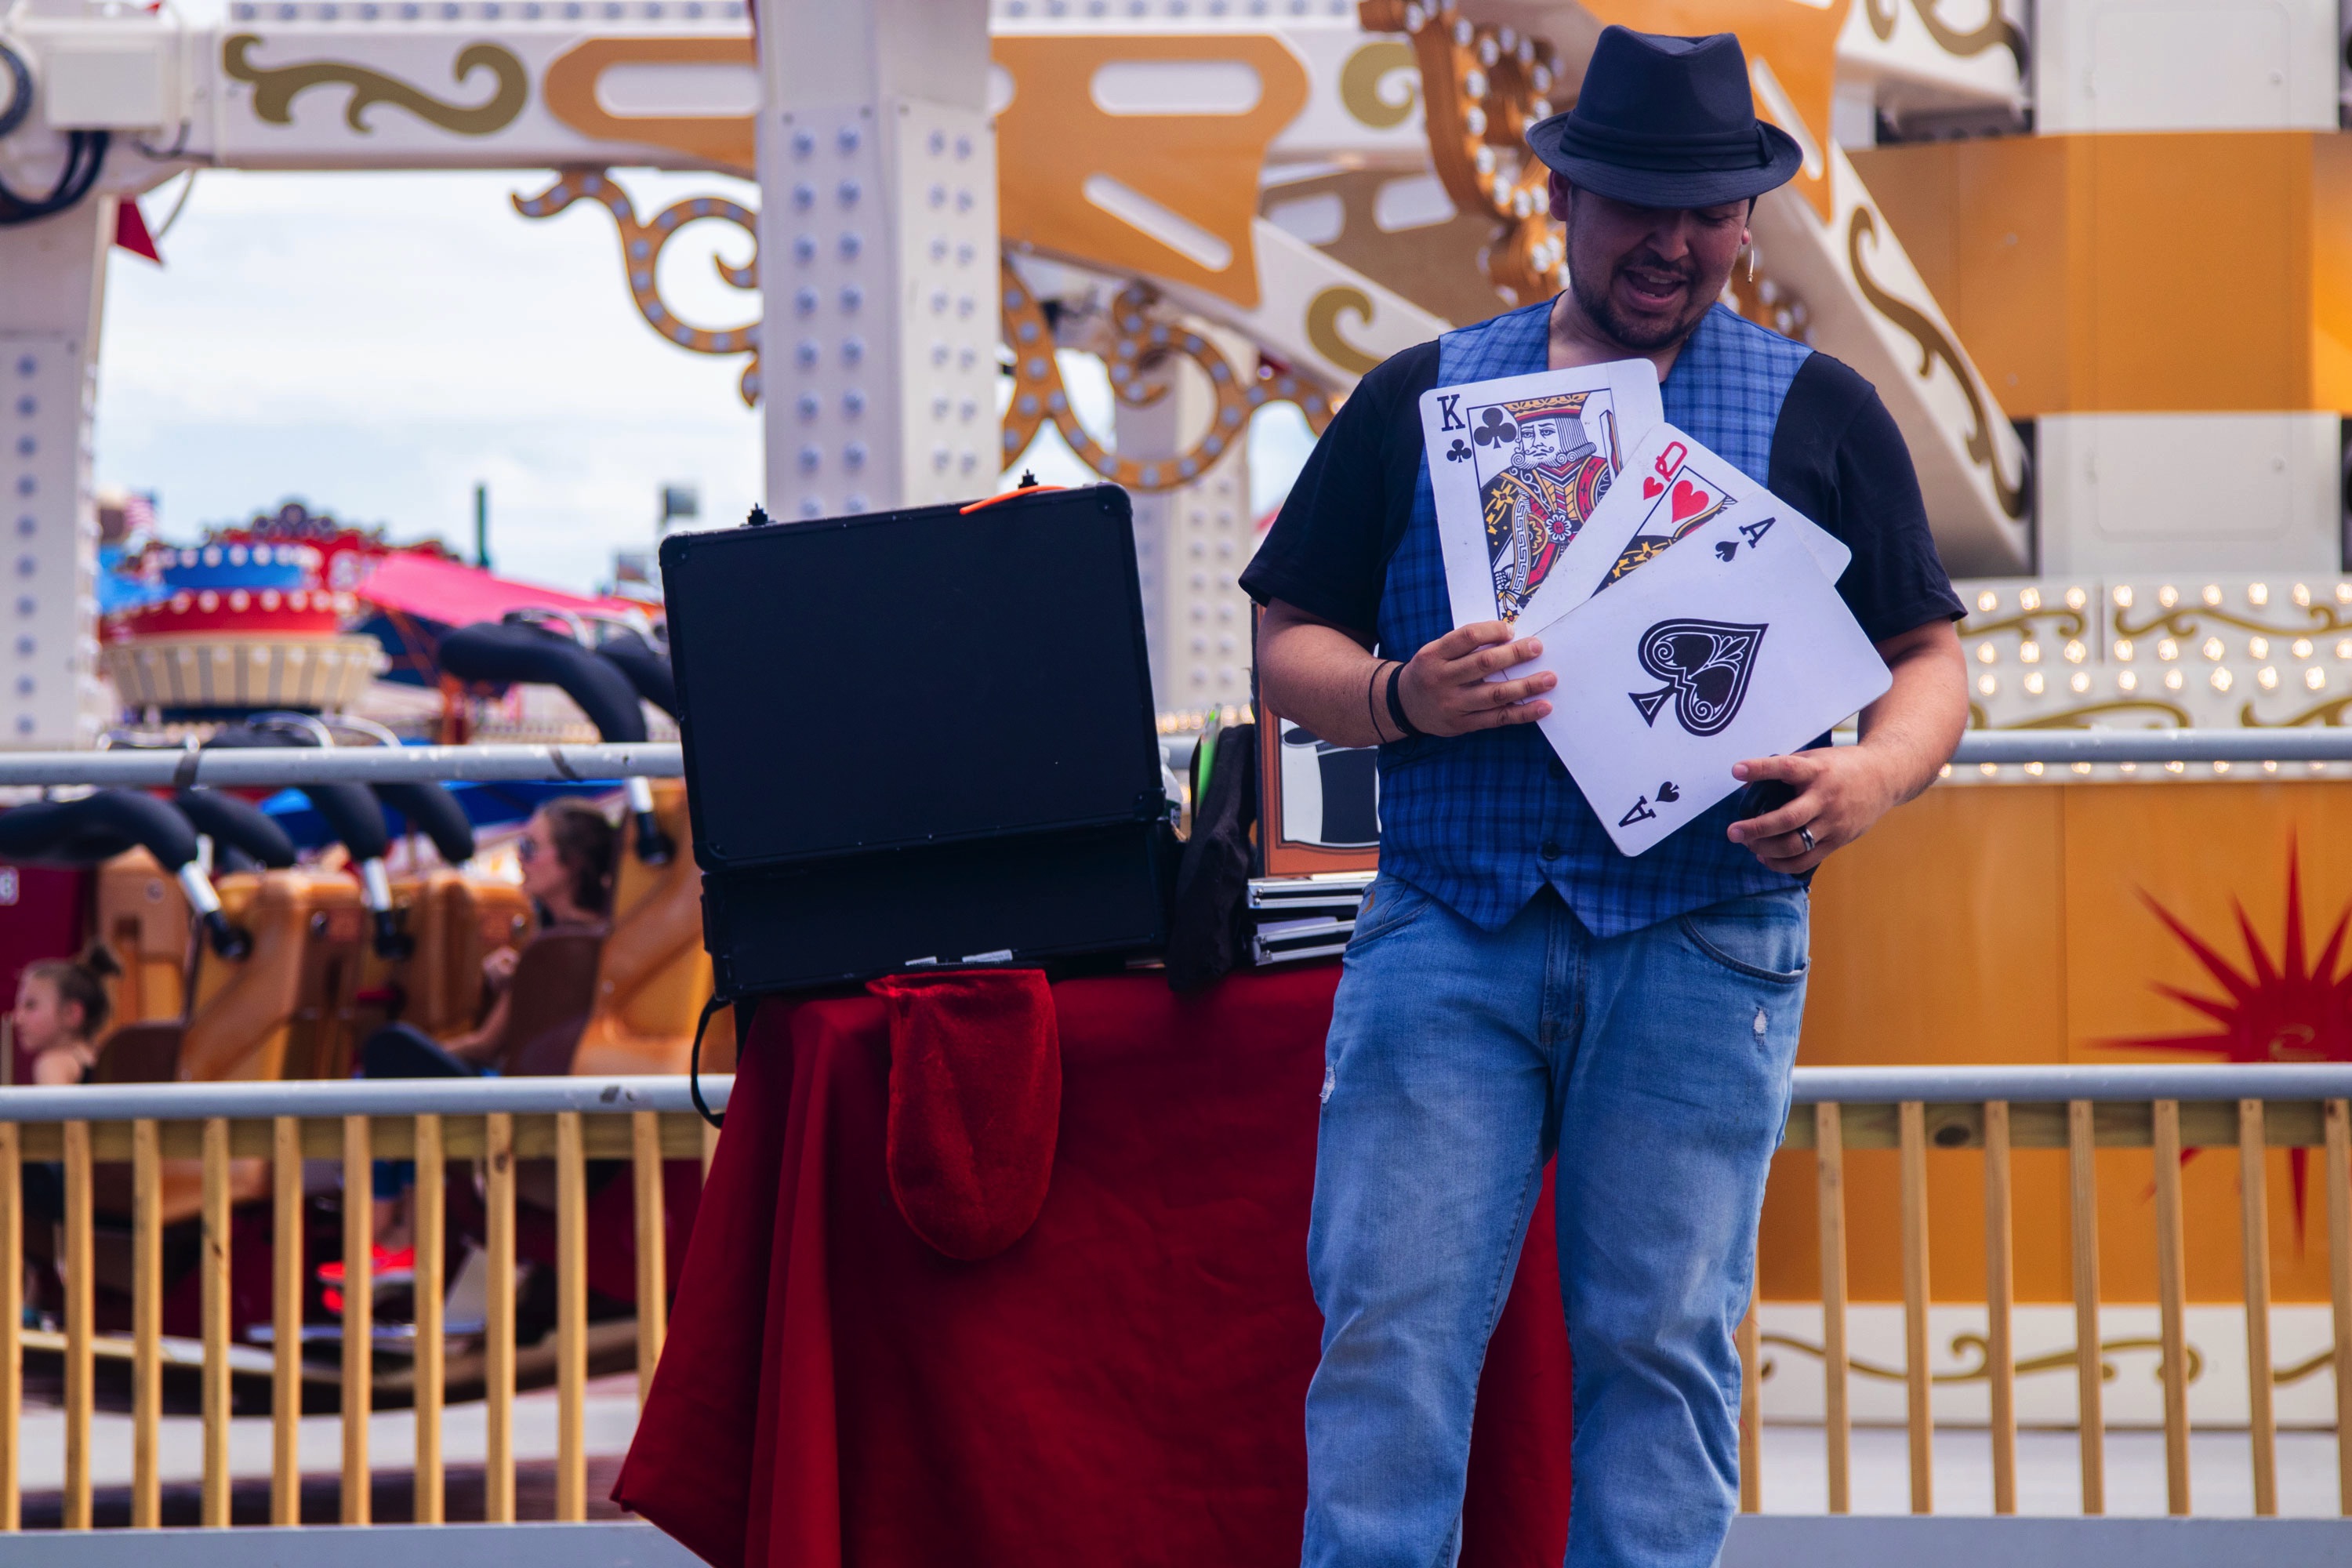 Luna Park Magician Omar Olusion at a public show in NYC 2019